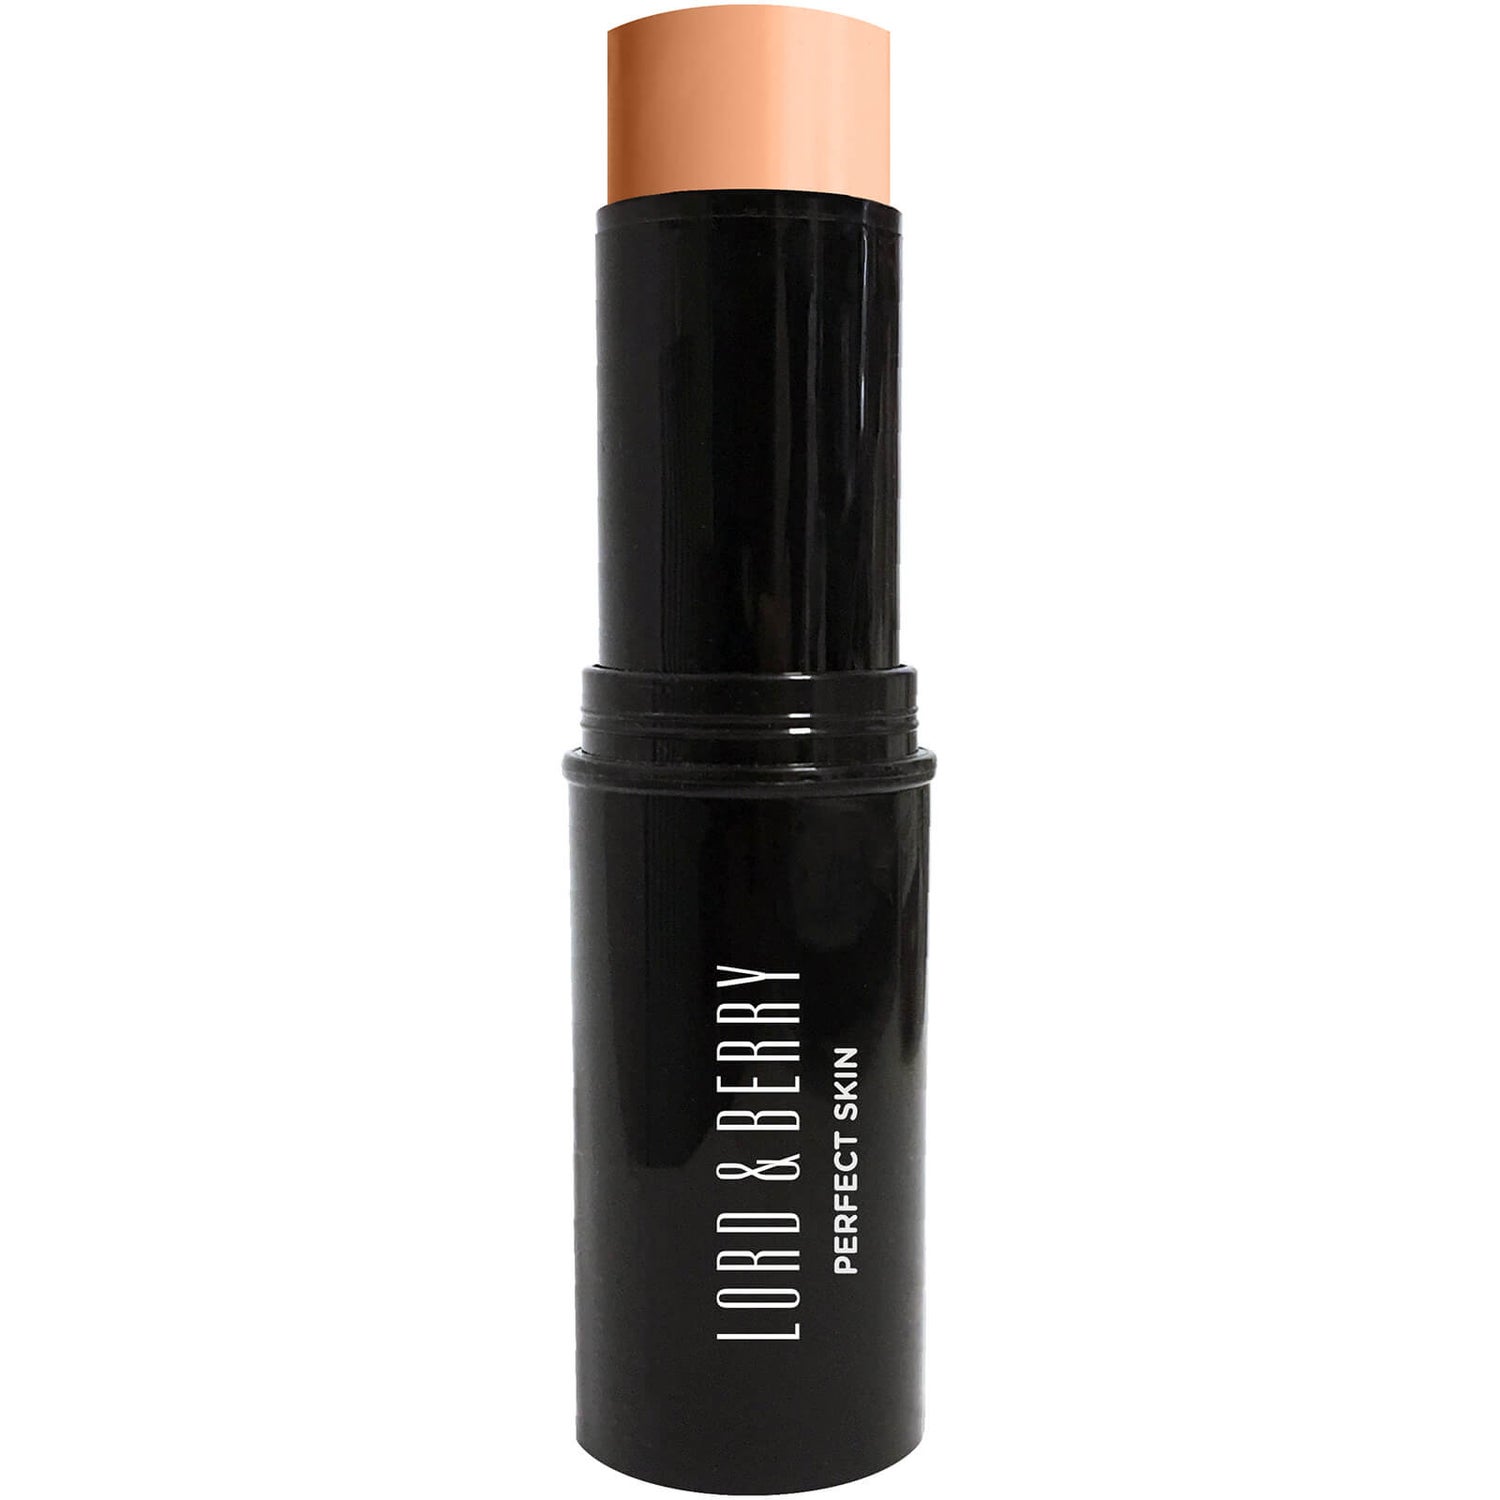 Lord & Berry Perfect Skin Foundation Stick 50g (Various Shades)